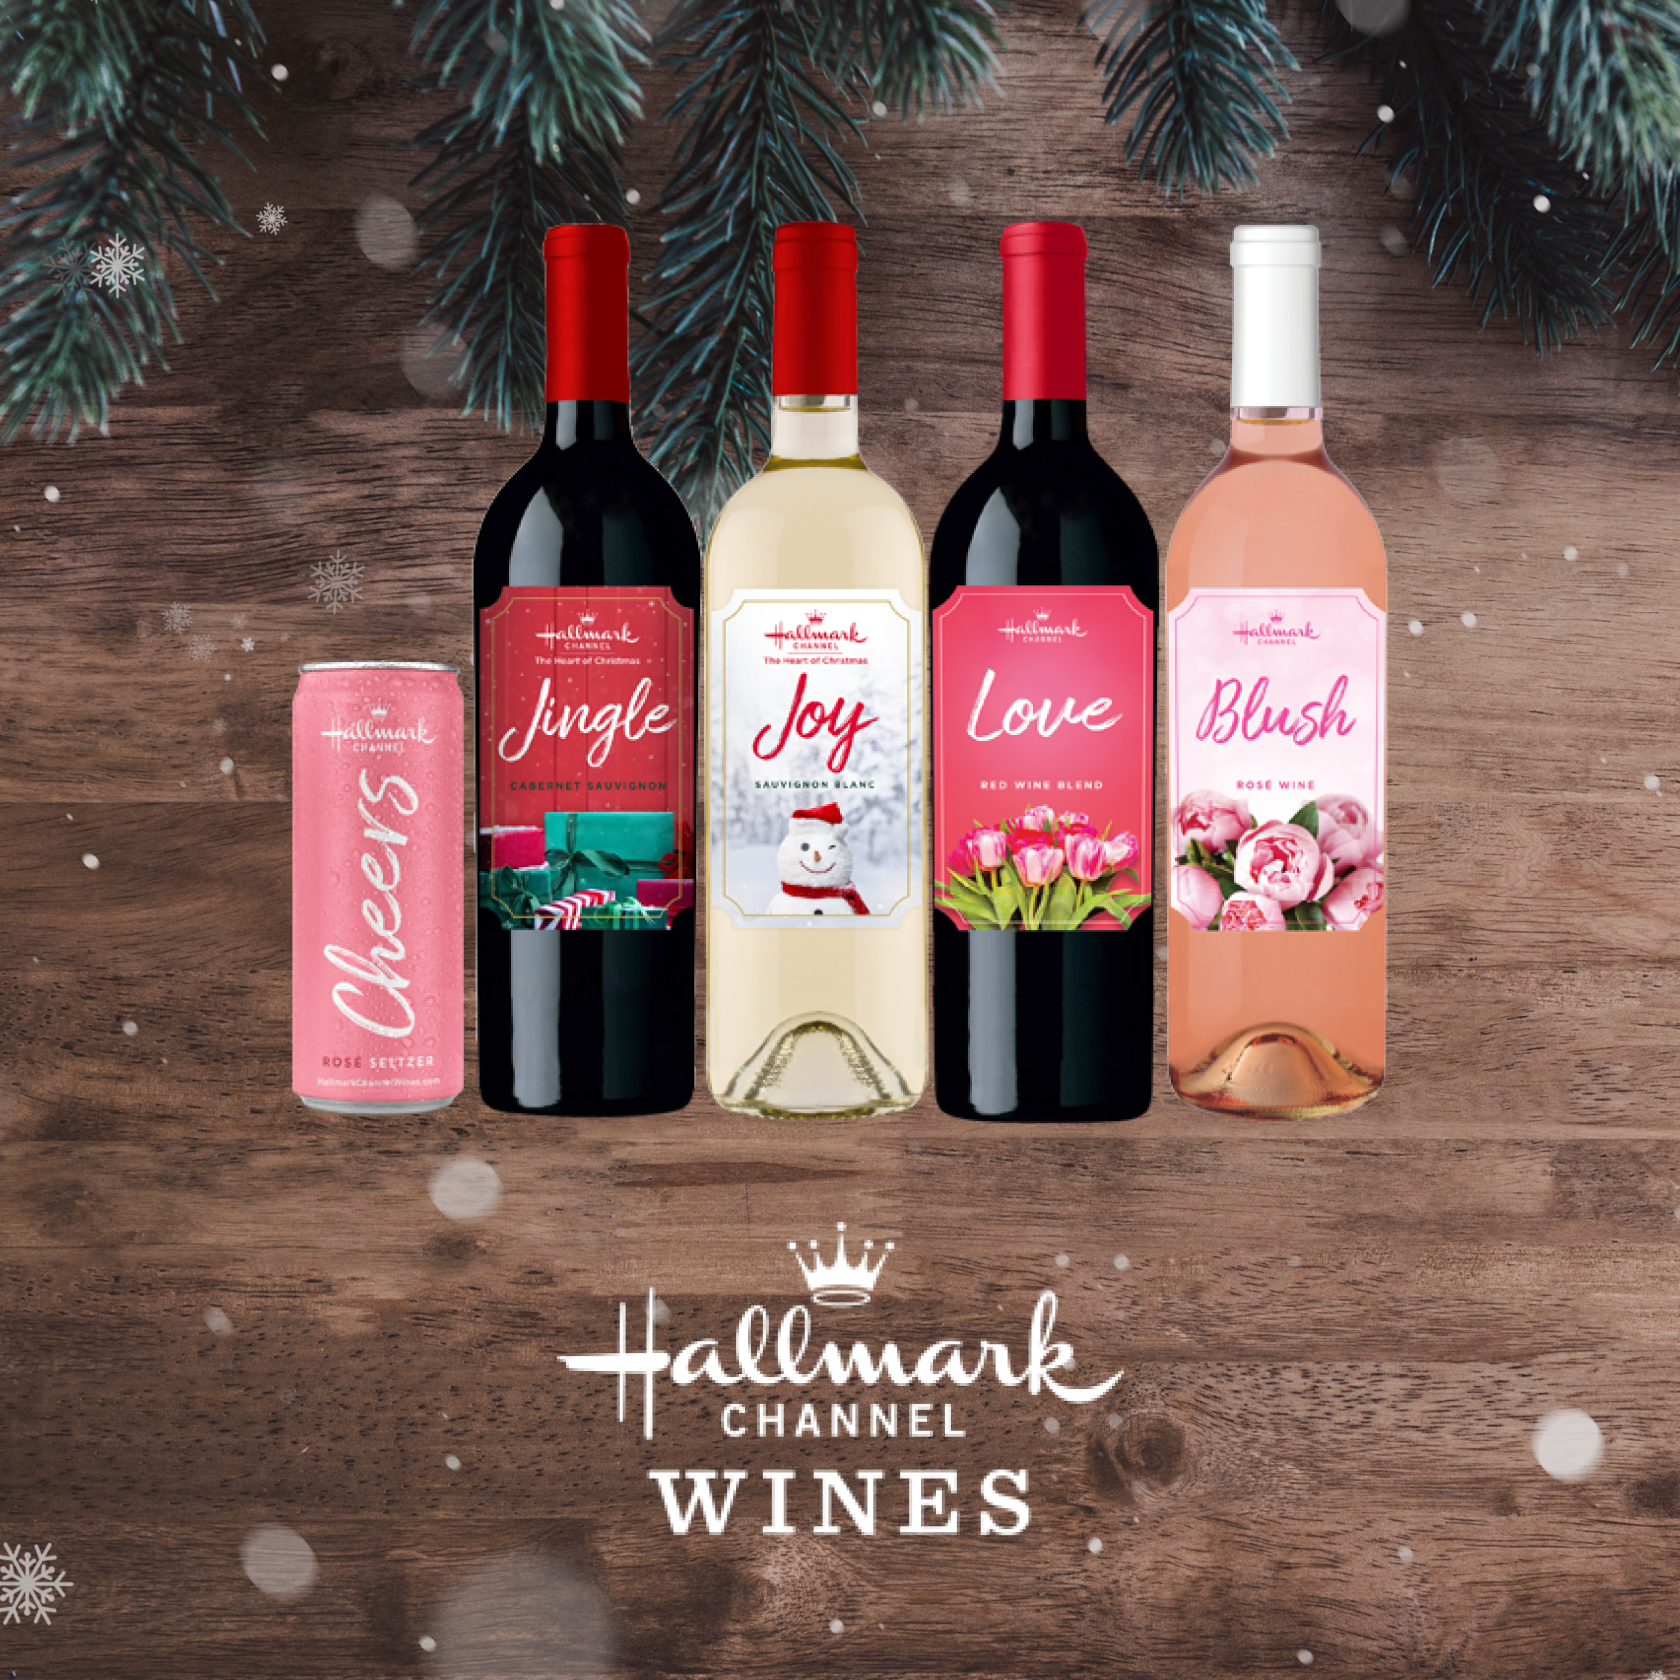 1 Alcohol can, 4 Wine bottles of Hallmark Channel Wines Collection